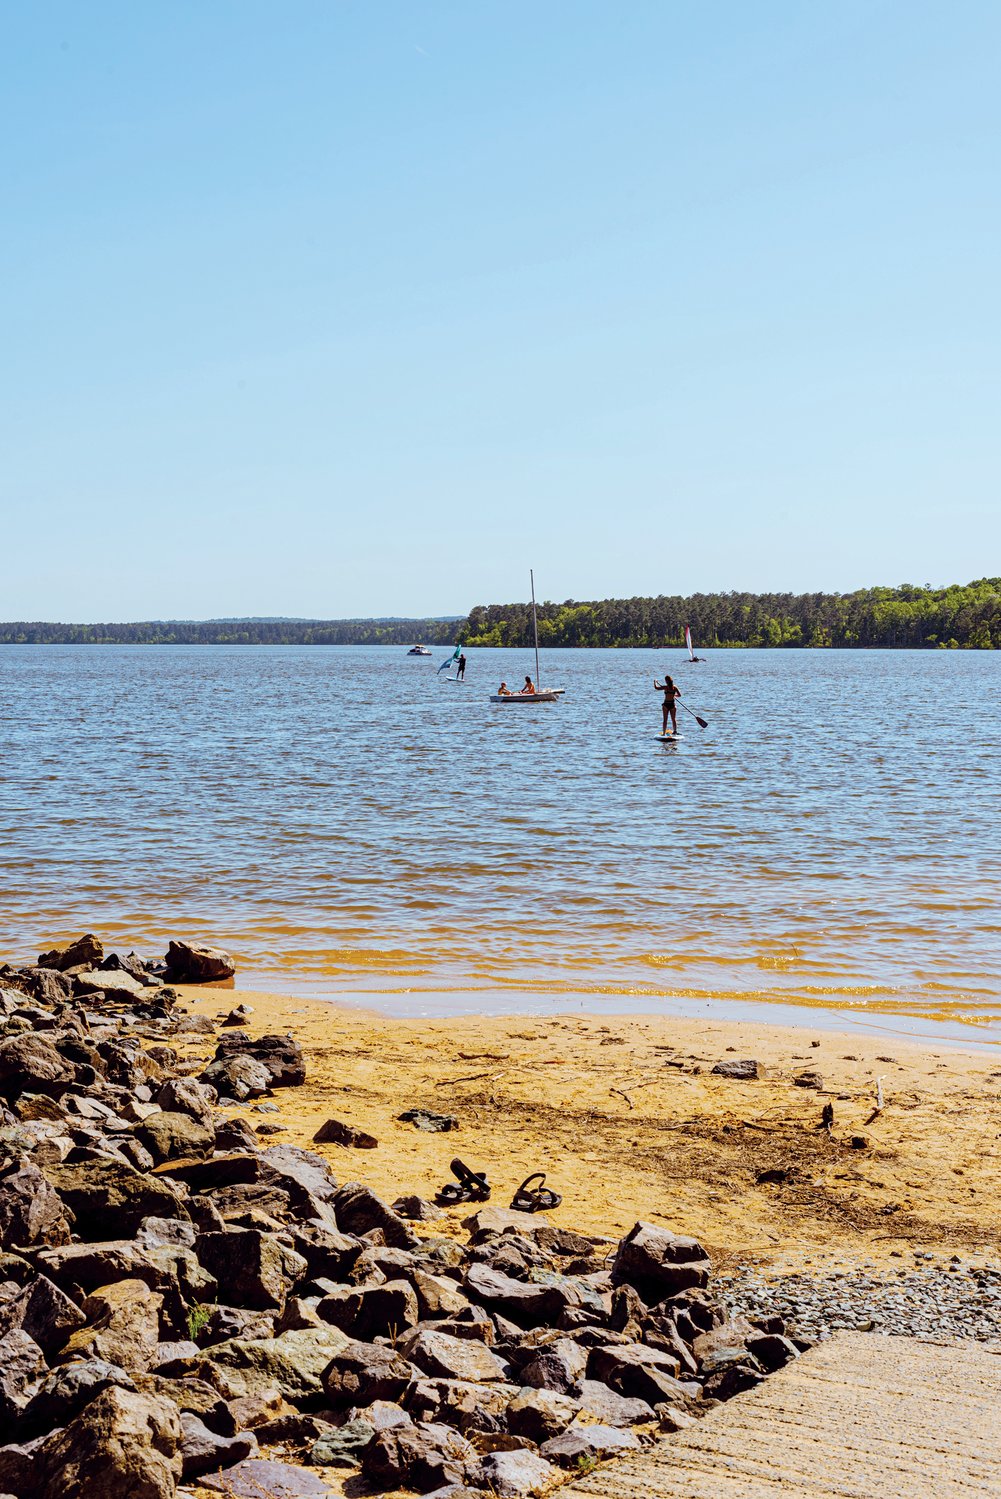 While access to Jordan Lake remains limited with state parks closed for social distancing requirements, there’s still activity on the lake. How that translates into trash accumulation remains to be seen, with clean-up efforts also temporarily on hold..